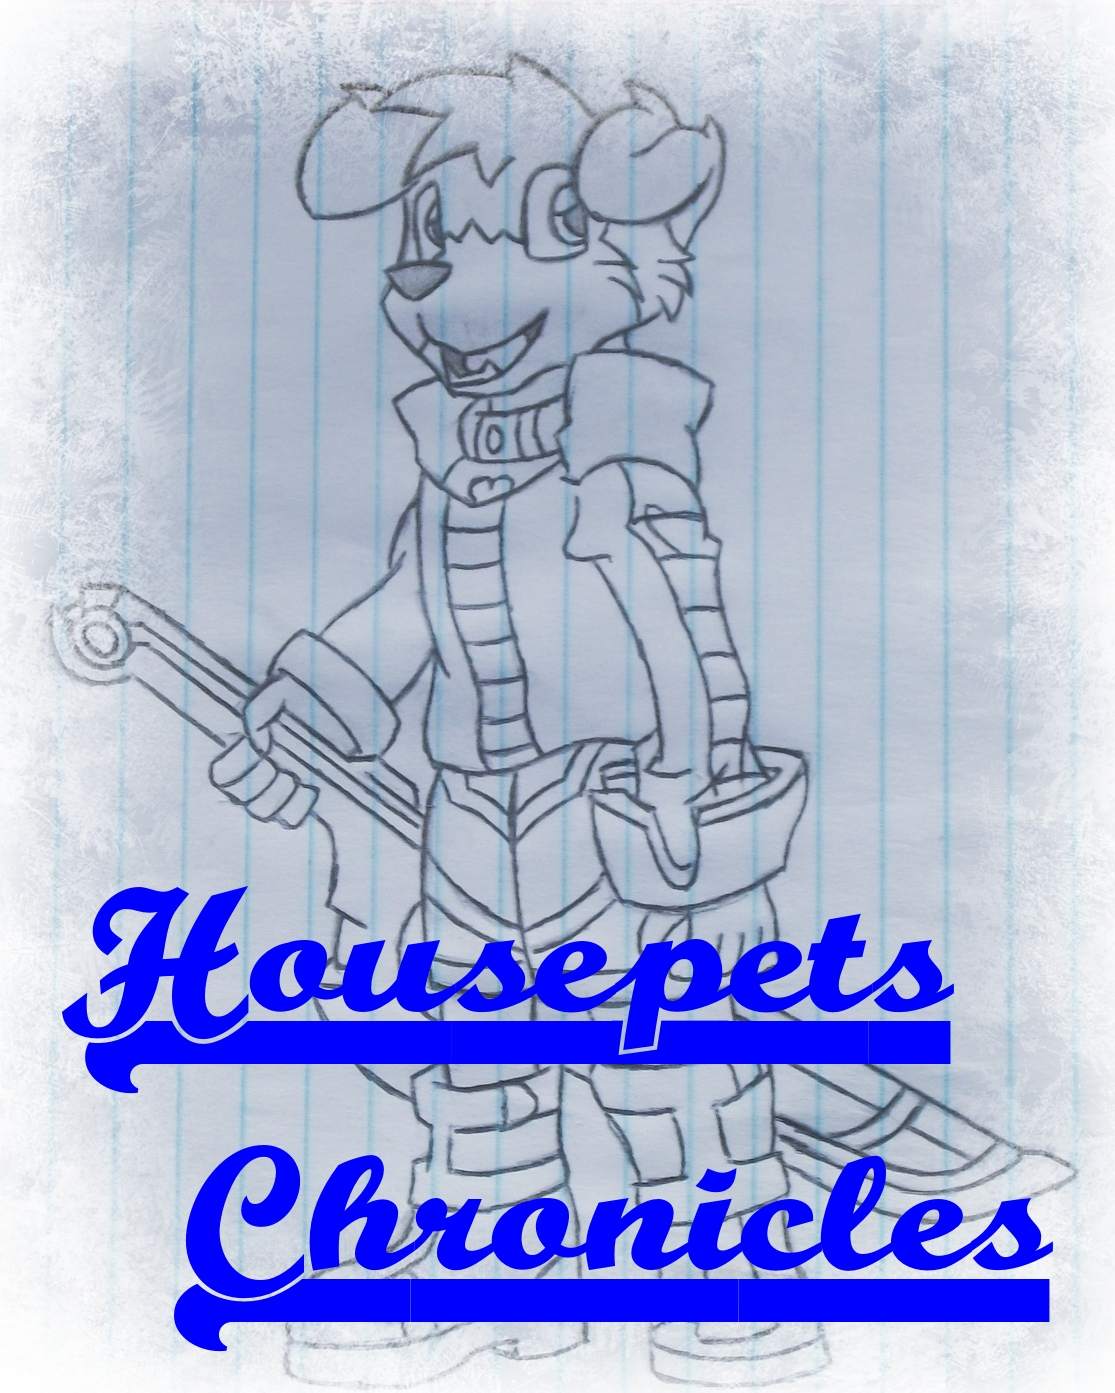 3rd Place Housespets Cronicles(1).jpg